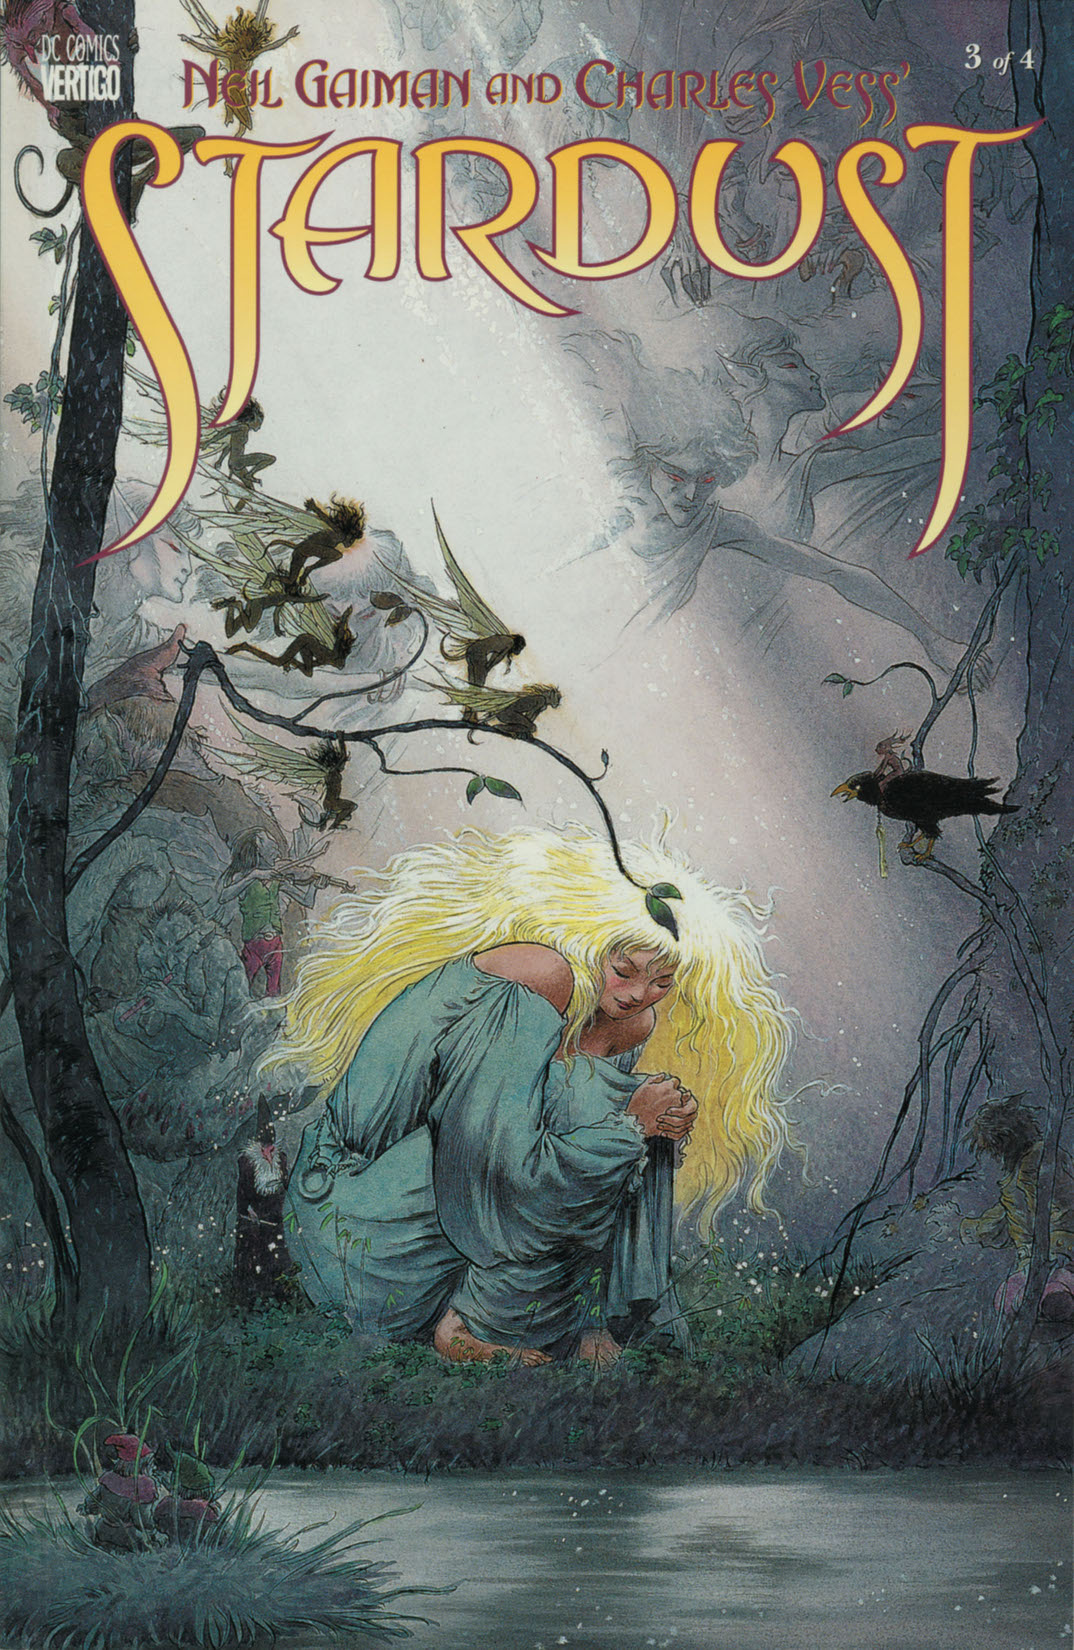 Neil Gaiman & Charles Vess' Stardust #3 preview images